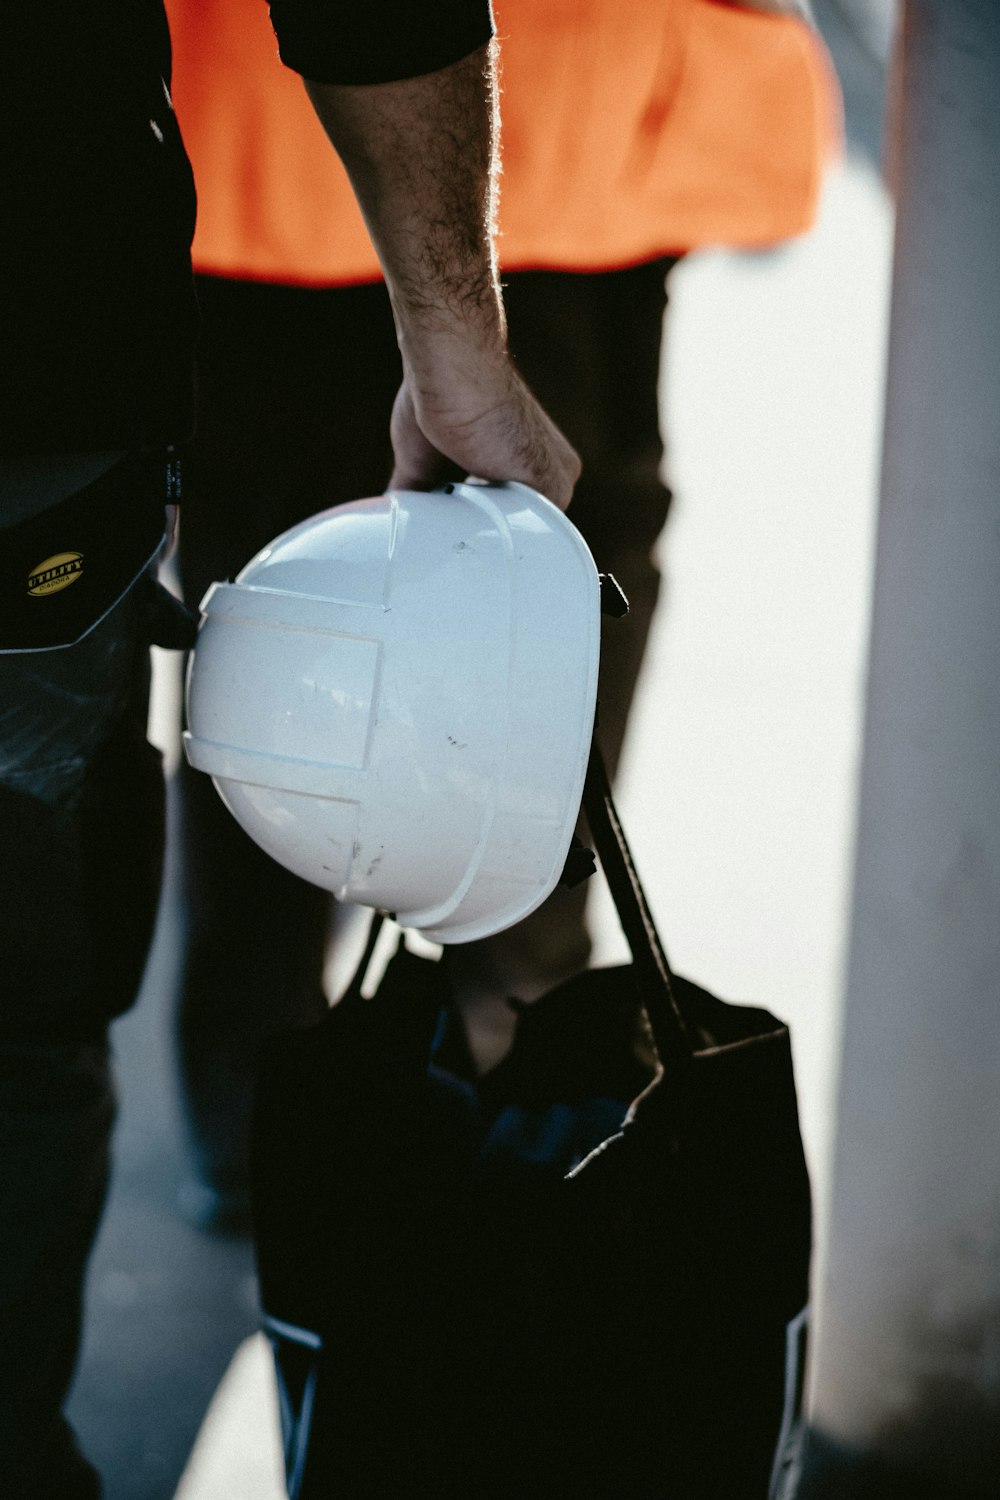 a man holding a white hard hat and a black bag